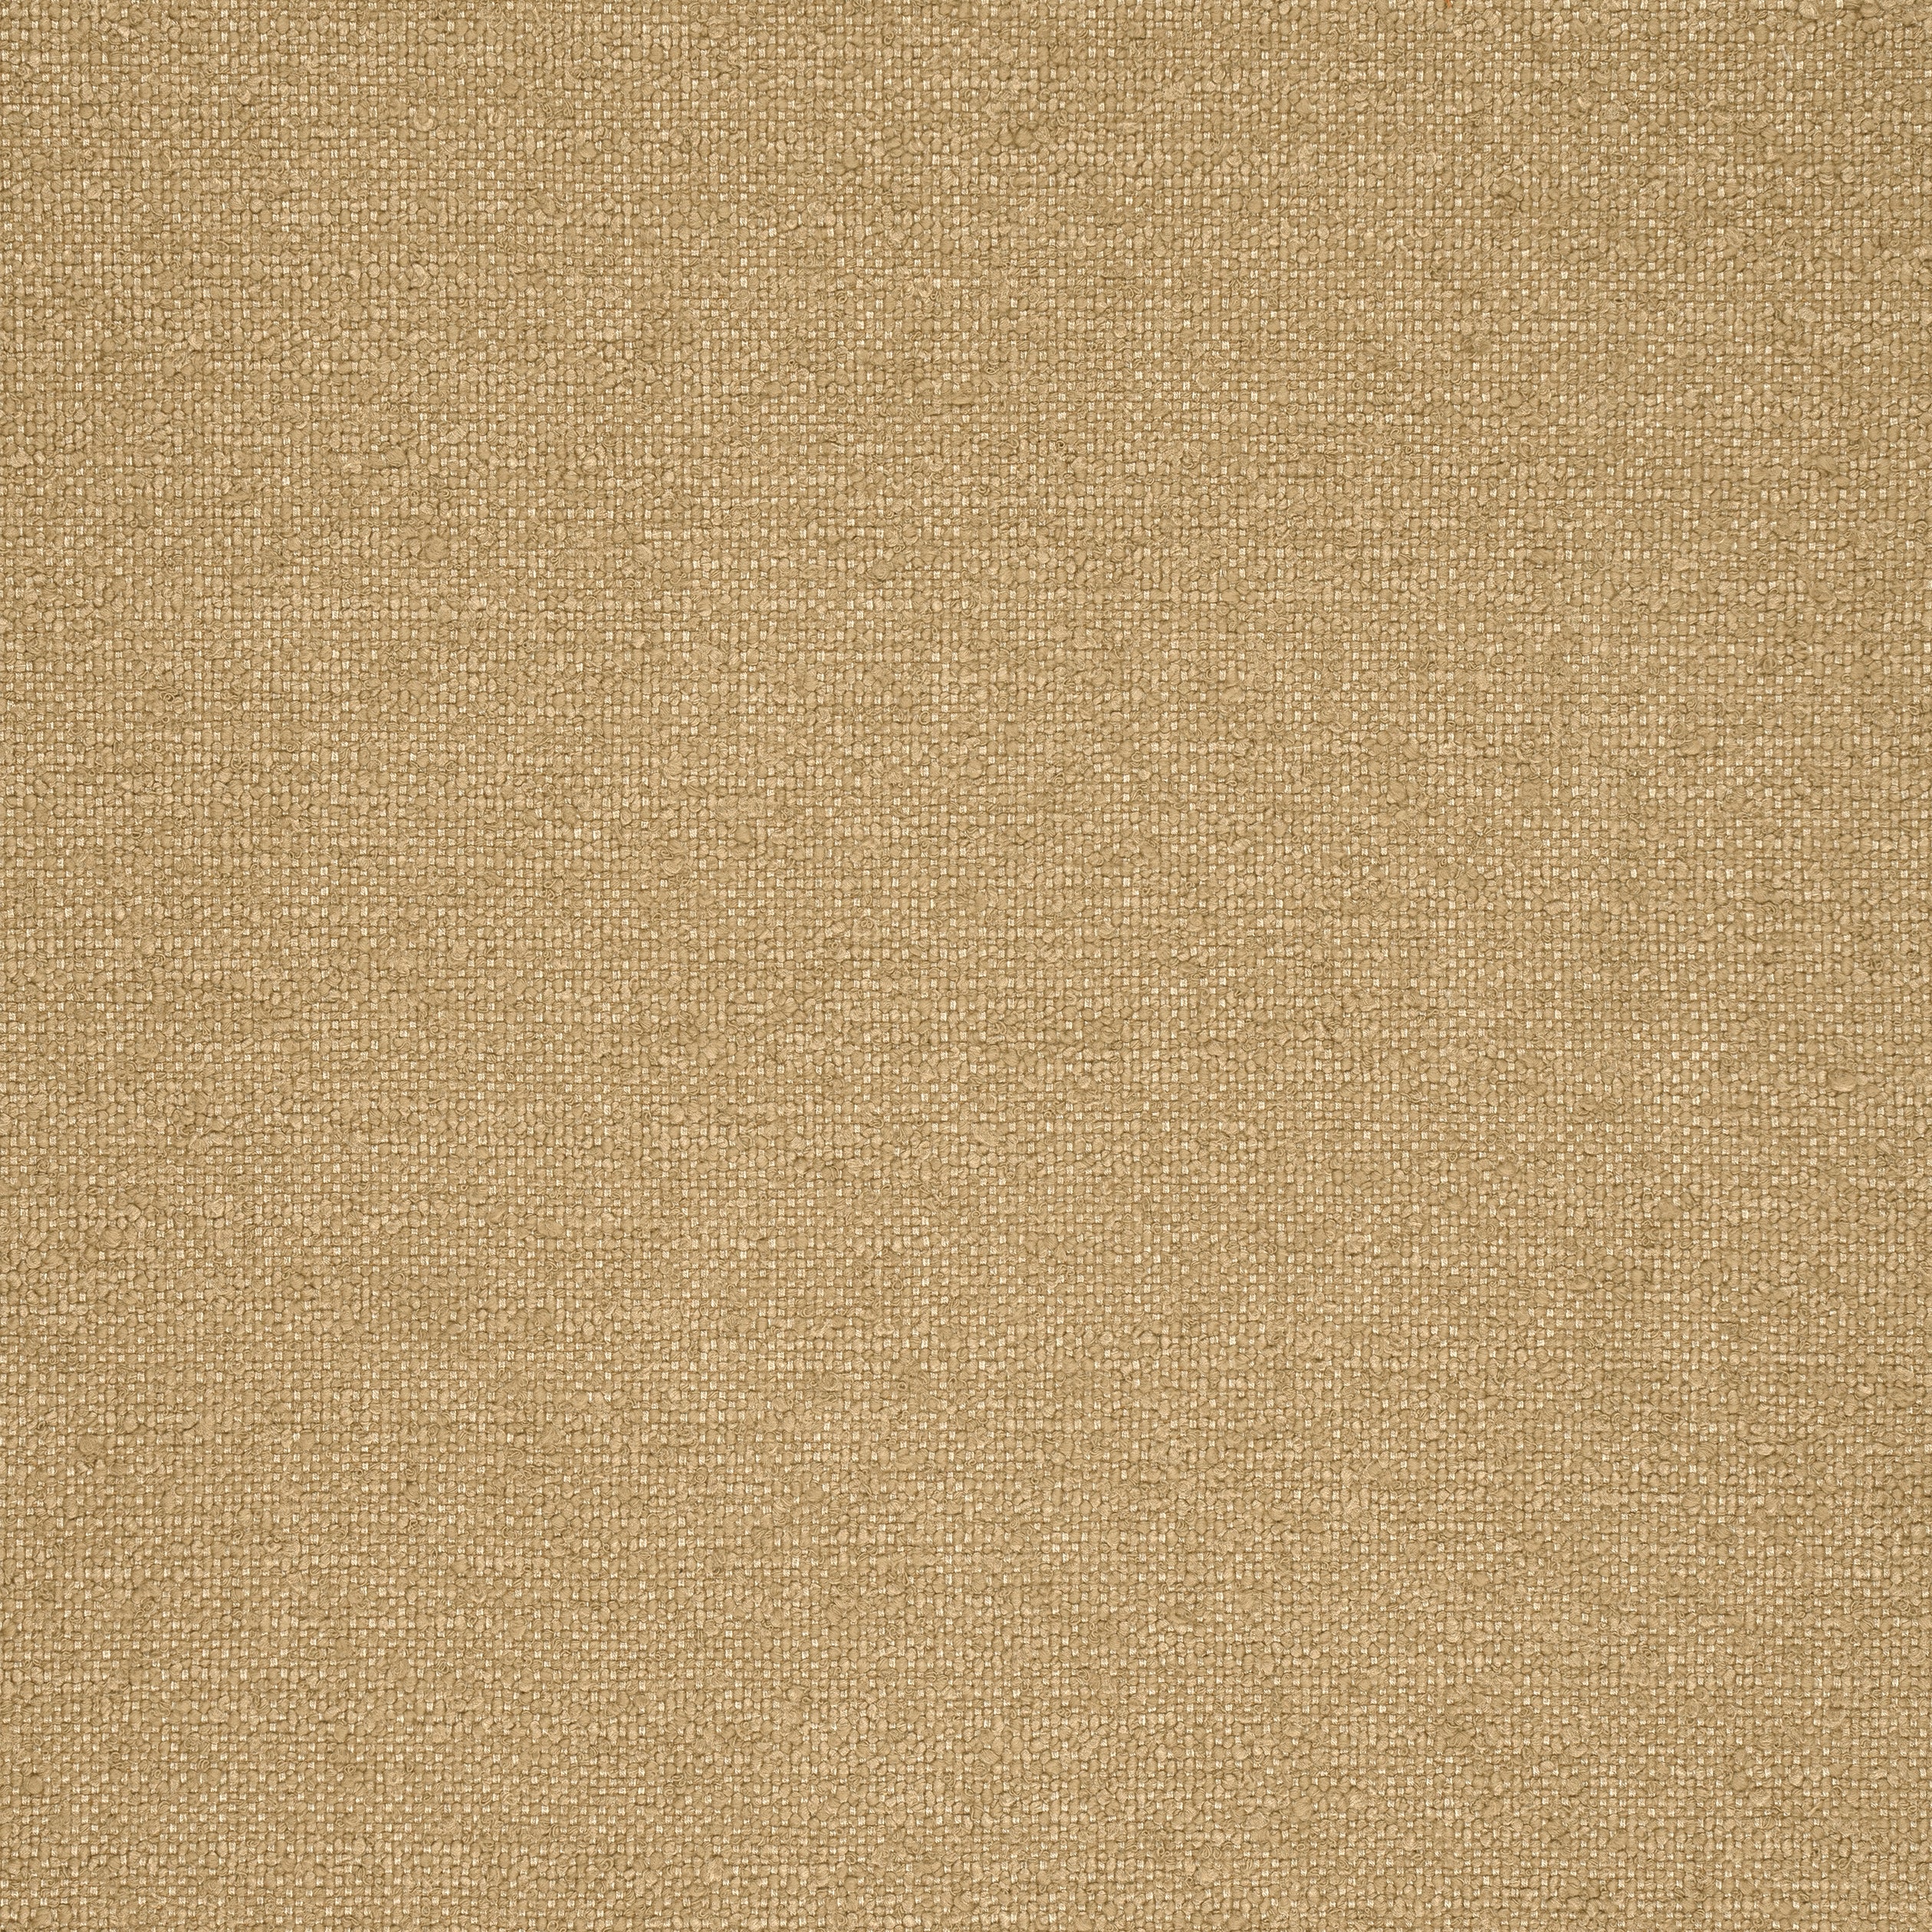 Sasso fabric in camel color - pattern number W77104 - by Thibaut in the Veneto collection